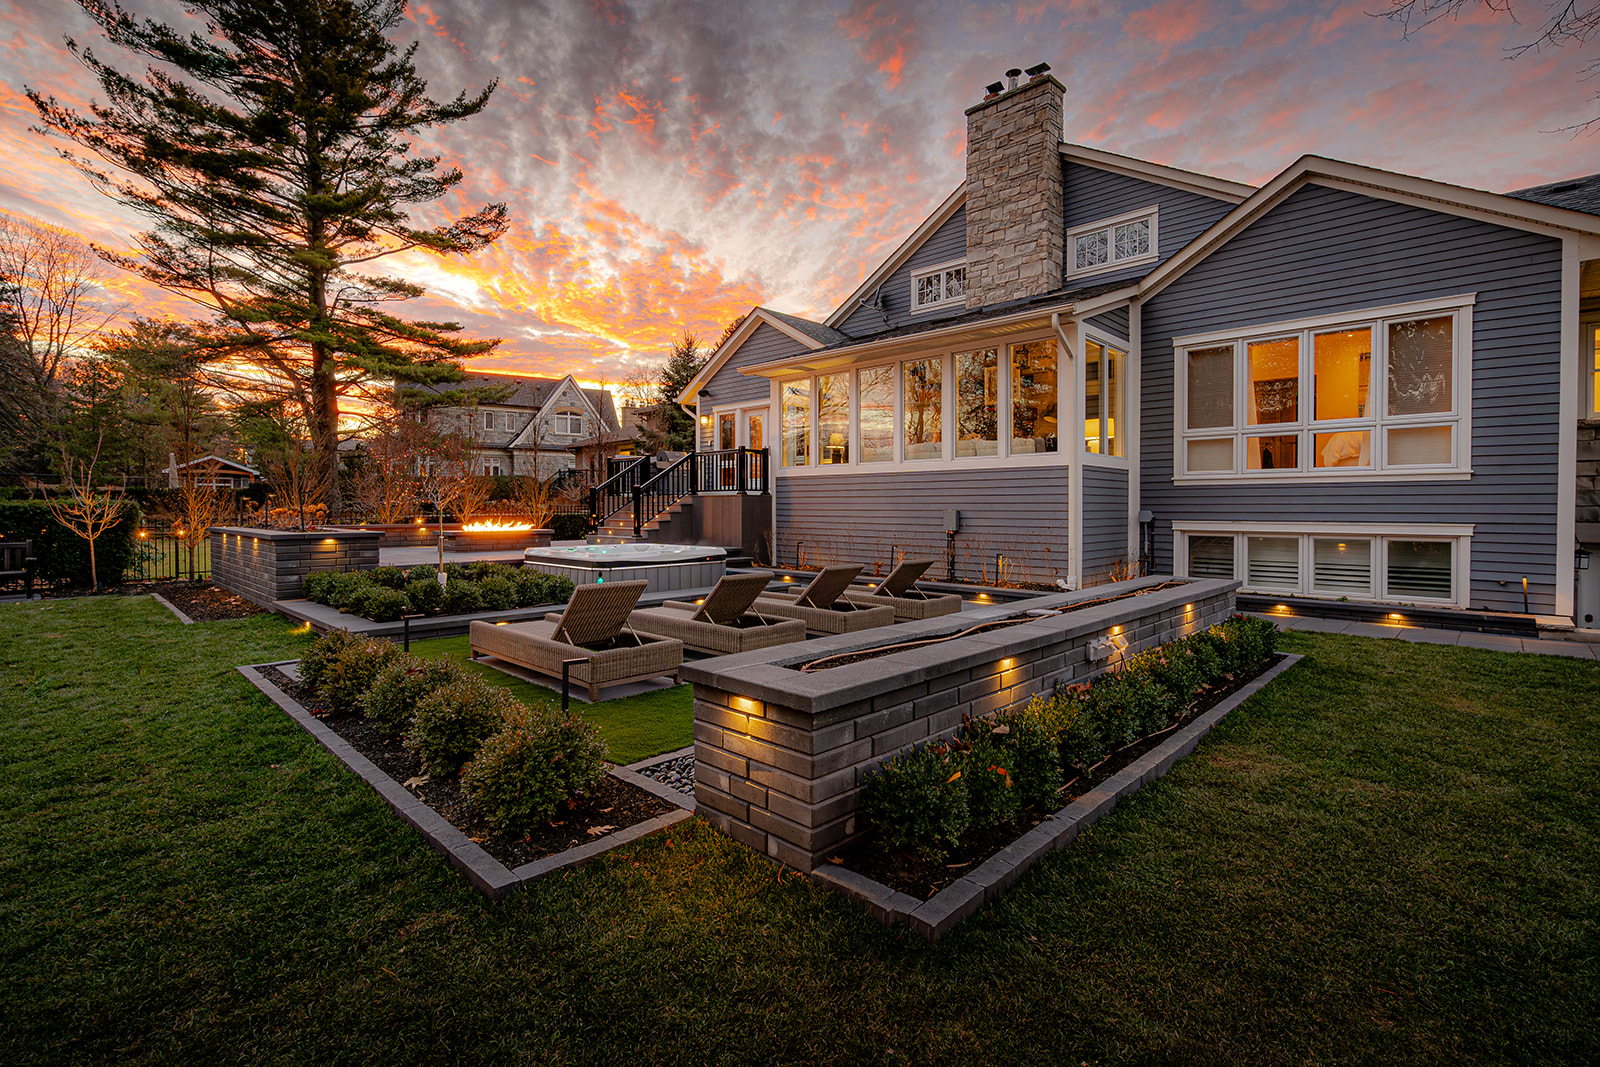 A backyard with lights on in the house and a sunset in the background.